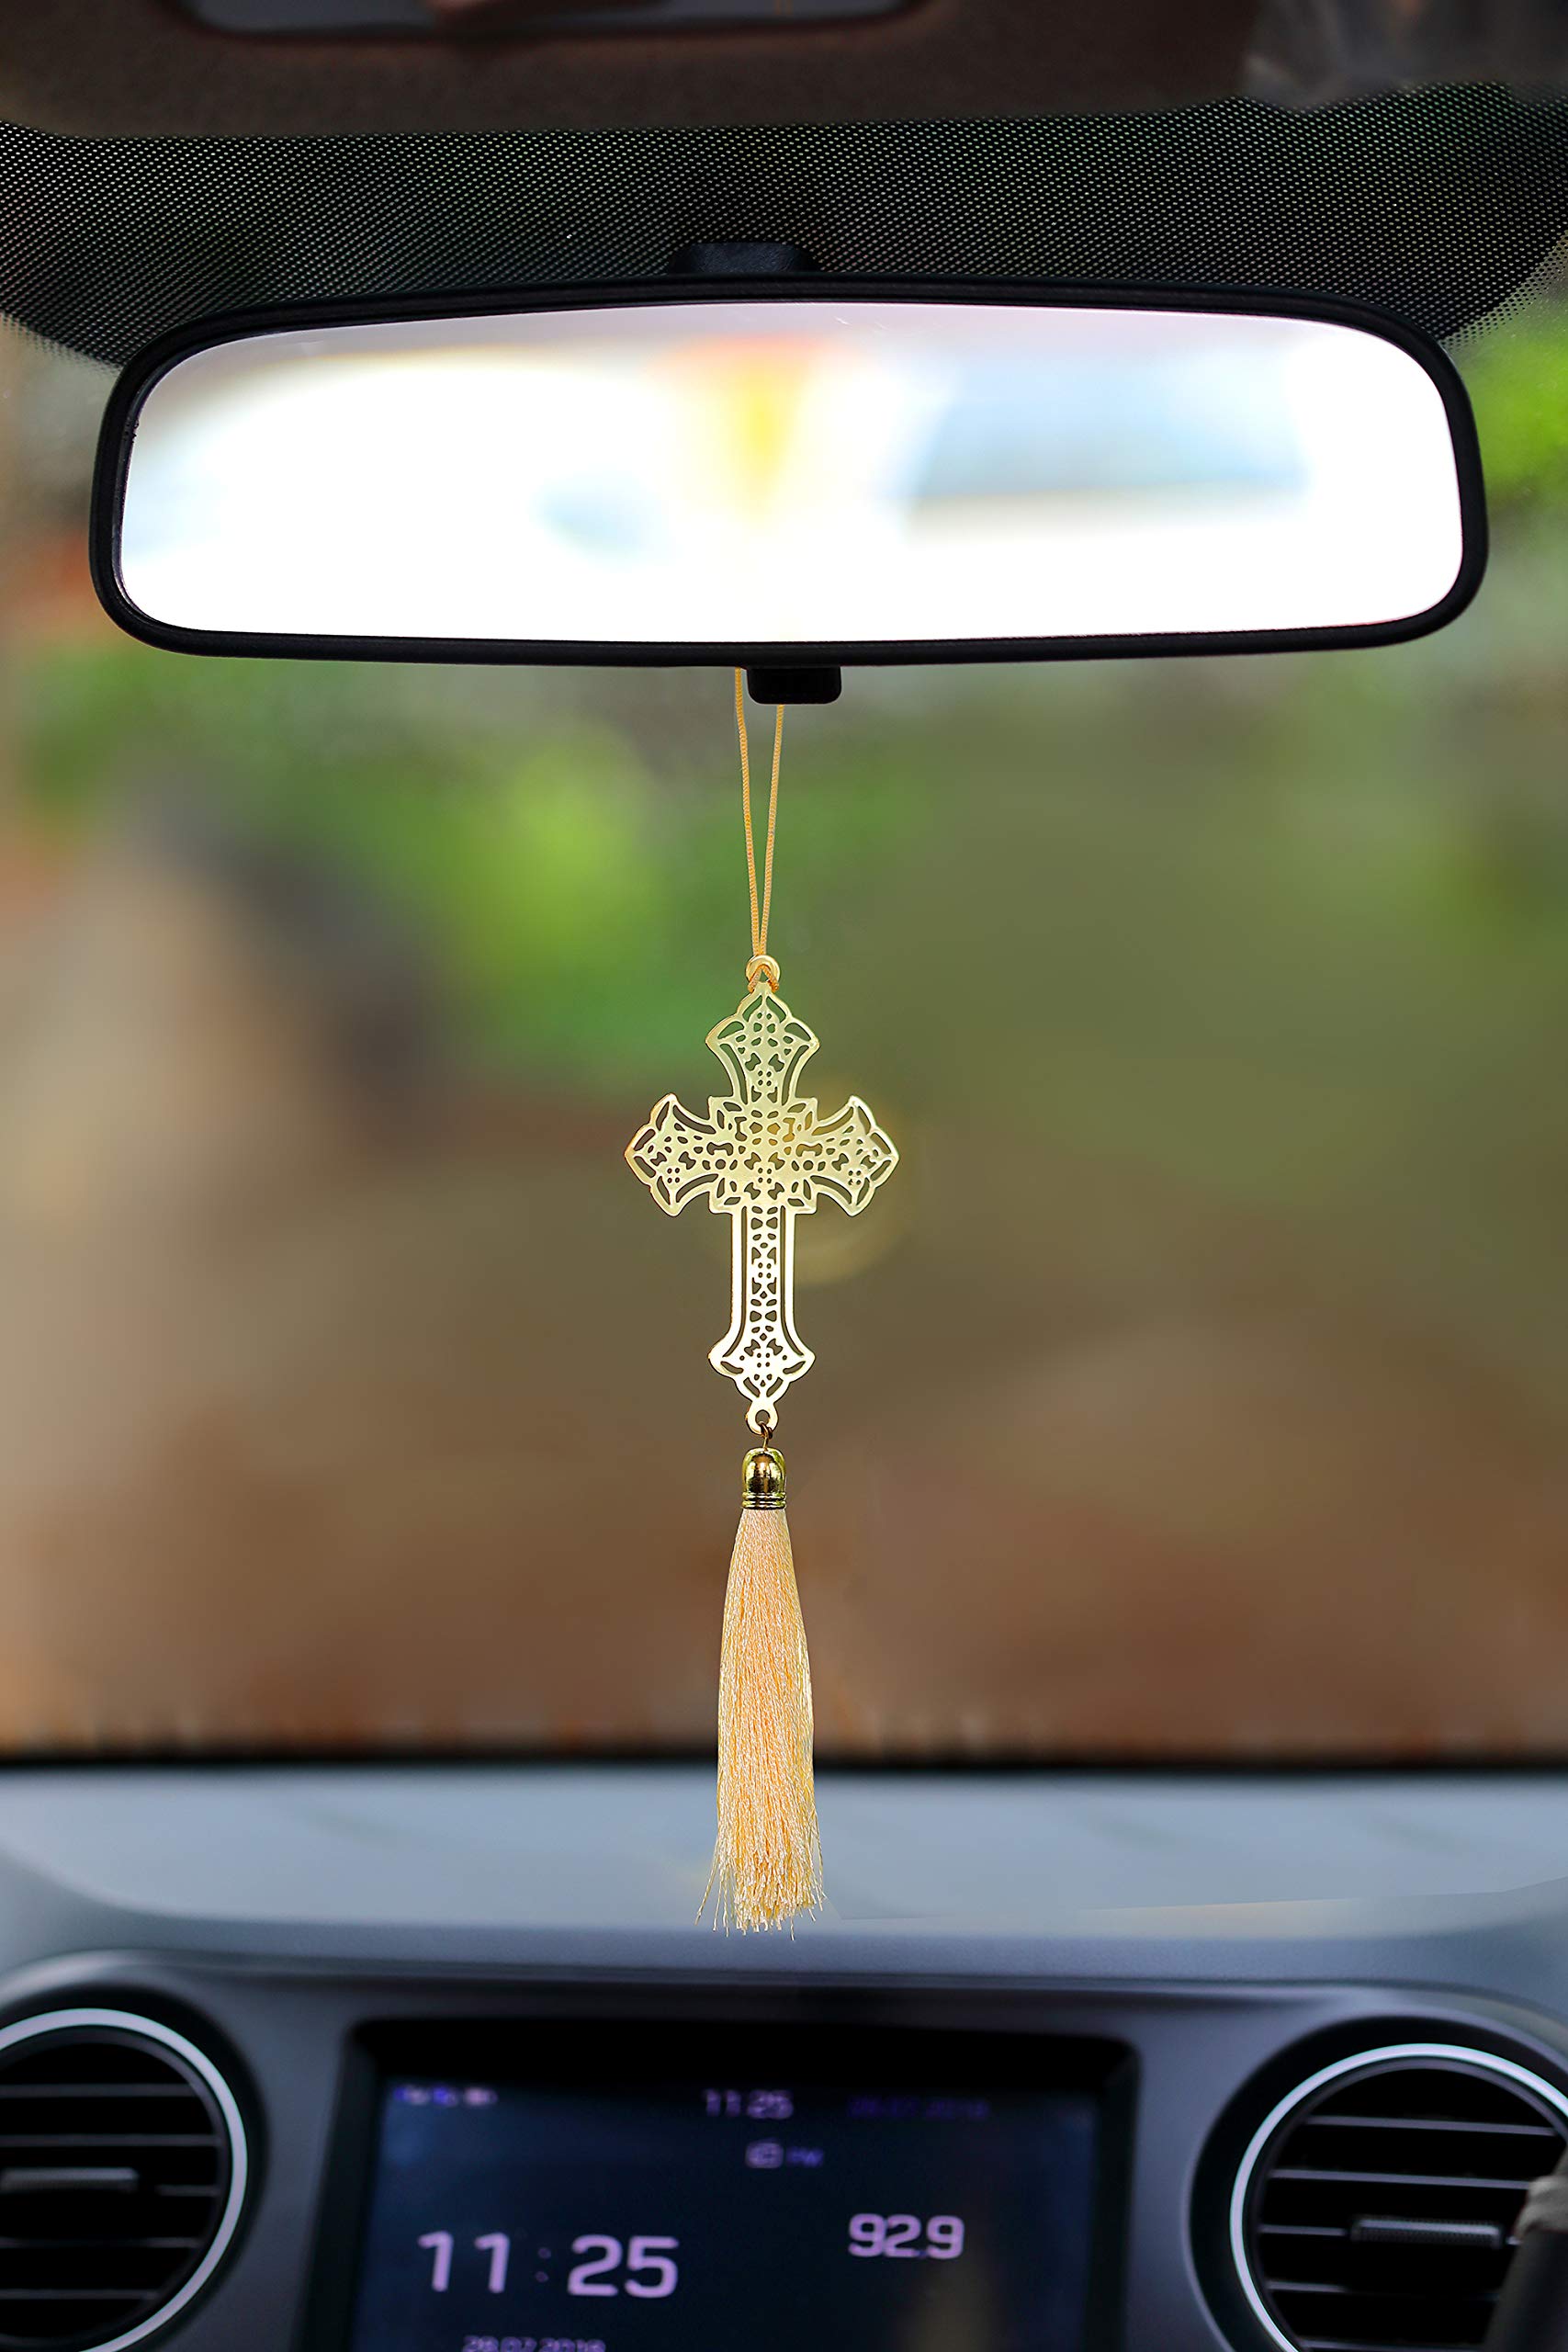 Pack of 2 - Christian Jesus Cross Hanging Accessories for Car rear view mirror Décor in Brass